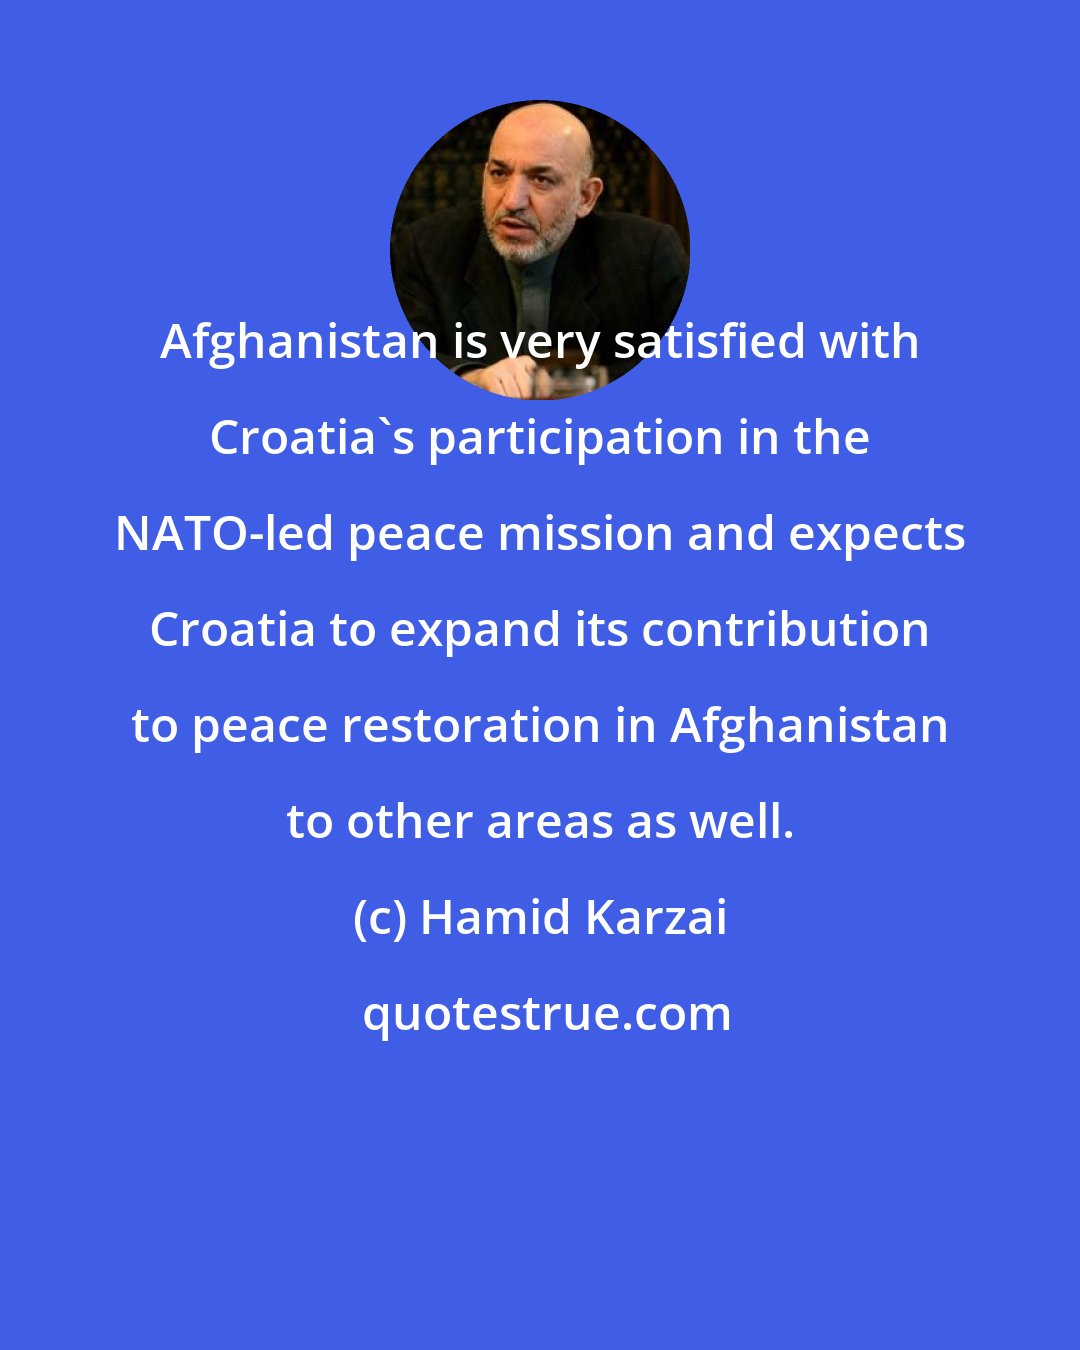 Hamid Karzai: Afghanistan is very satisfied with Croatia's participation in the NATO-led peace mission and expects Croatia to expand its contribution to peace restoration in Afghanistan to other areas as well.